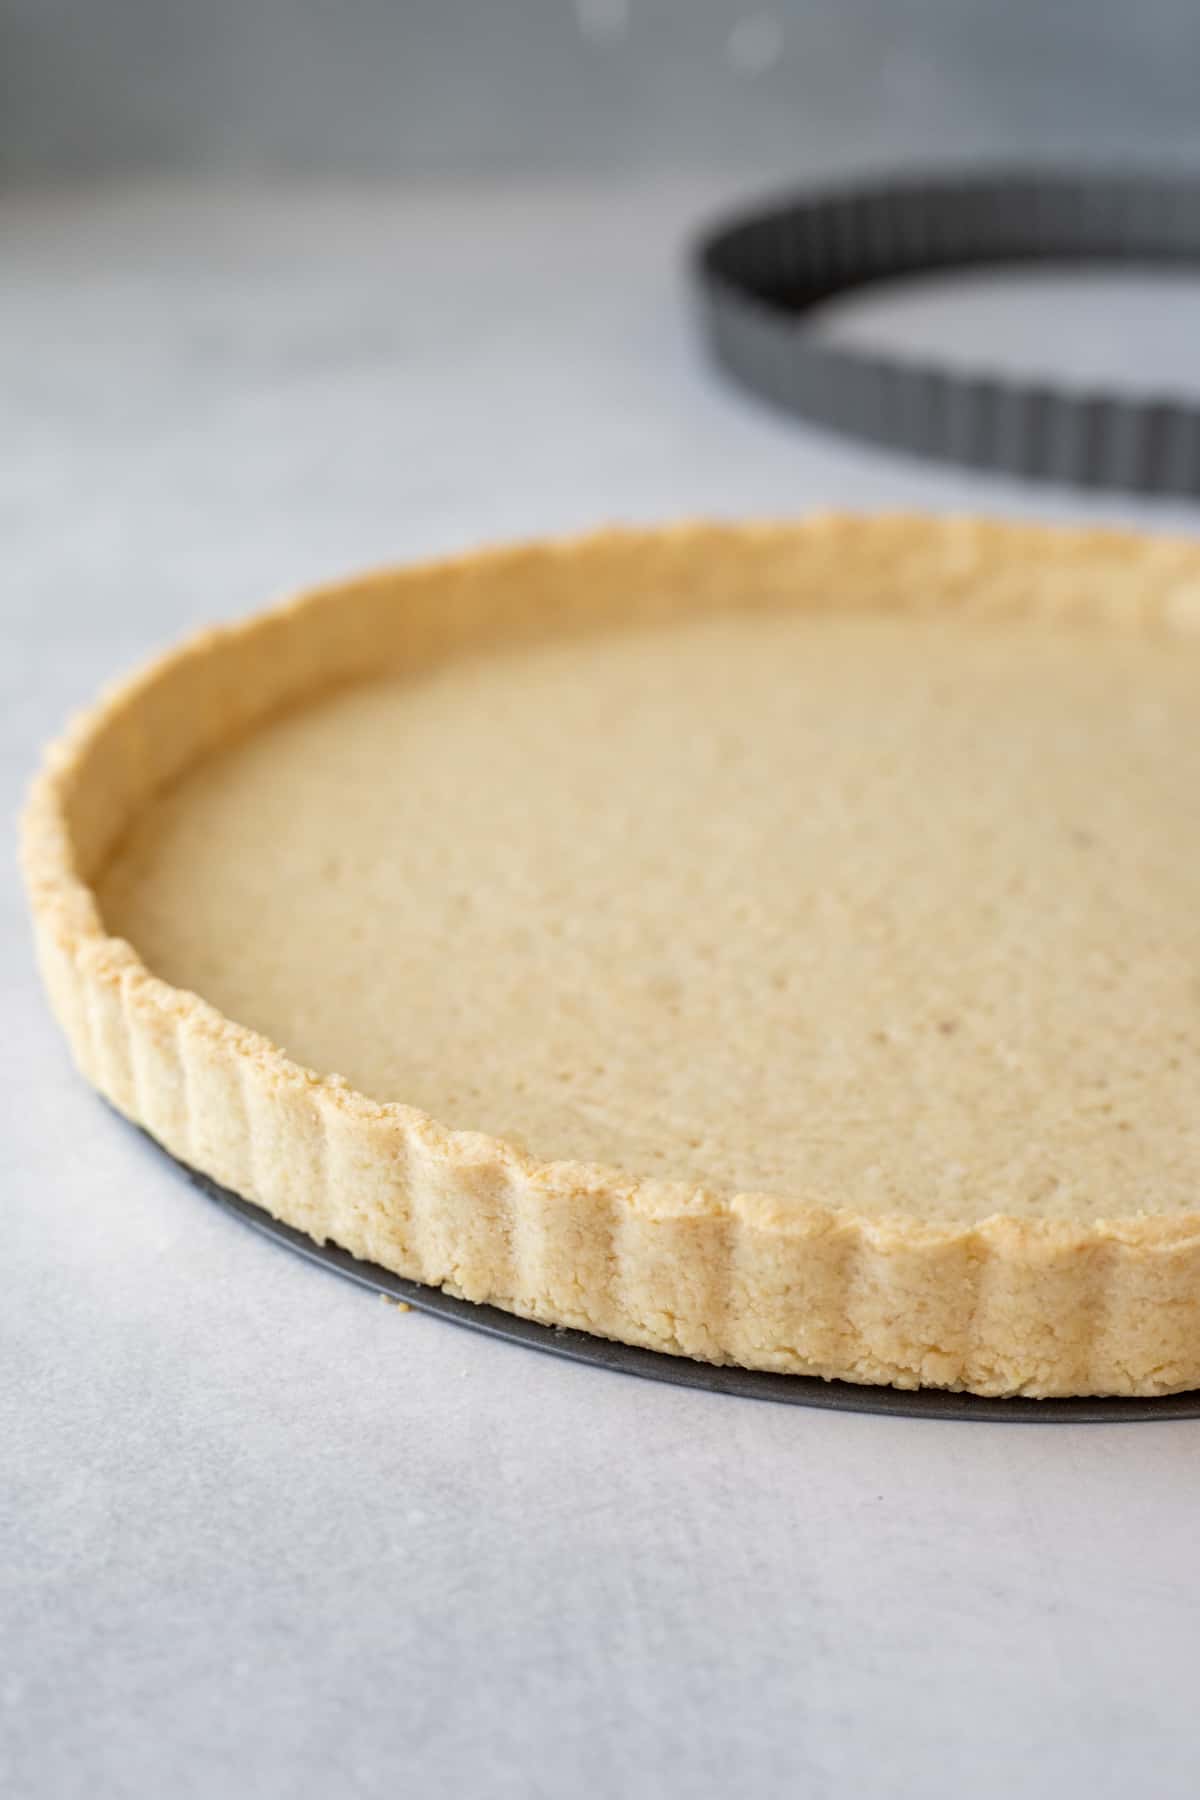 baked almond flour crust with pan ring removed to show flaky texture of crust